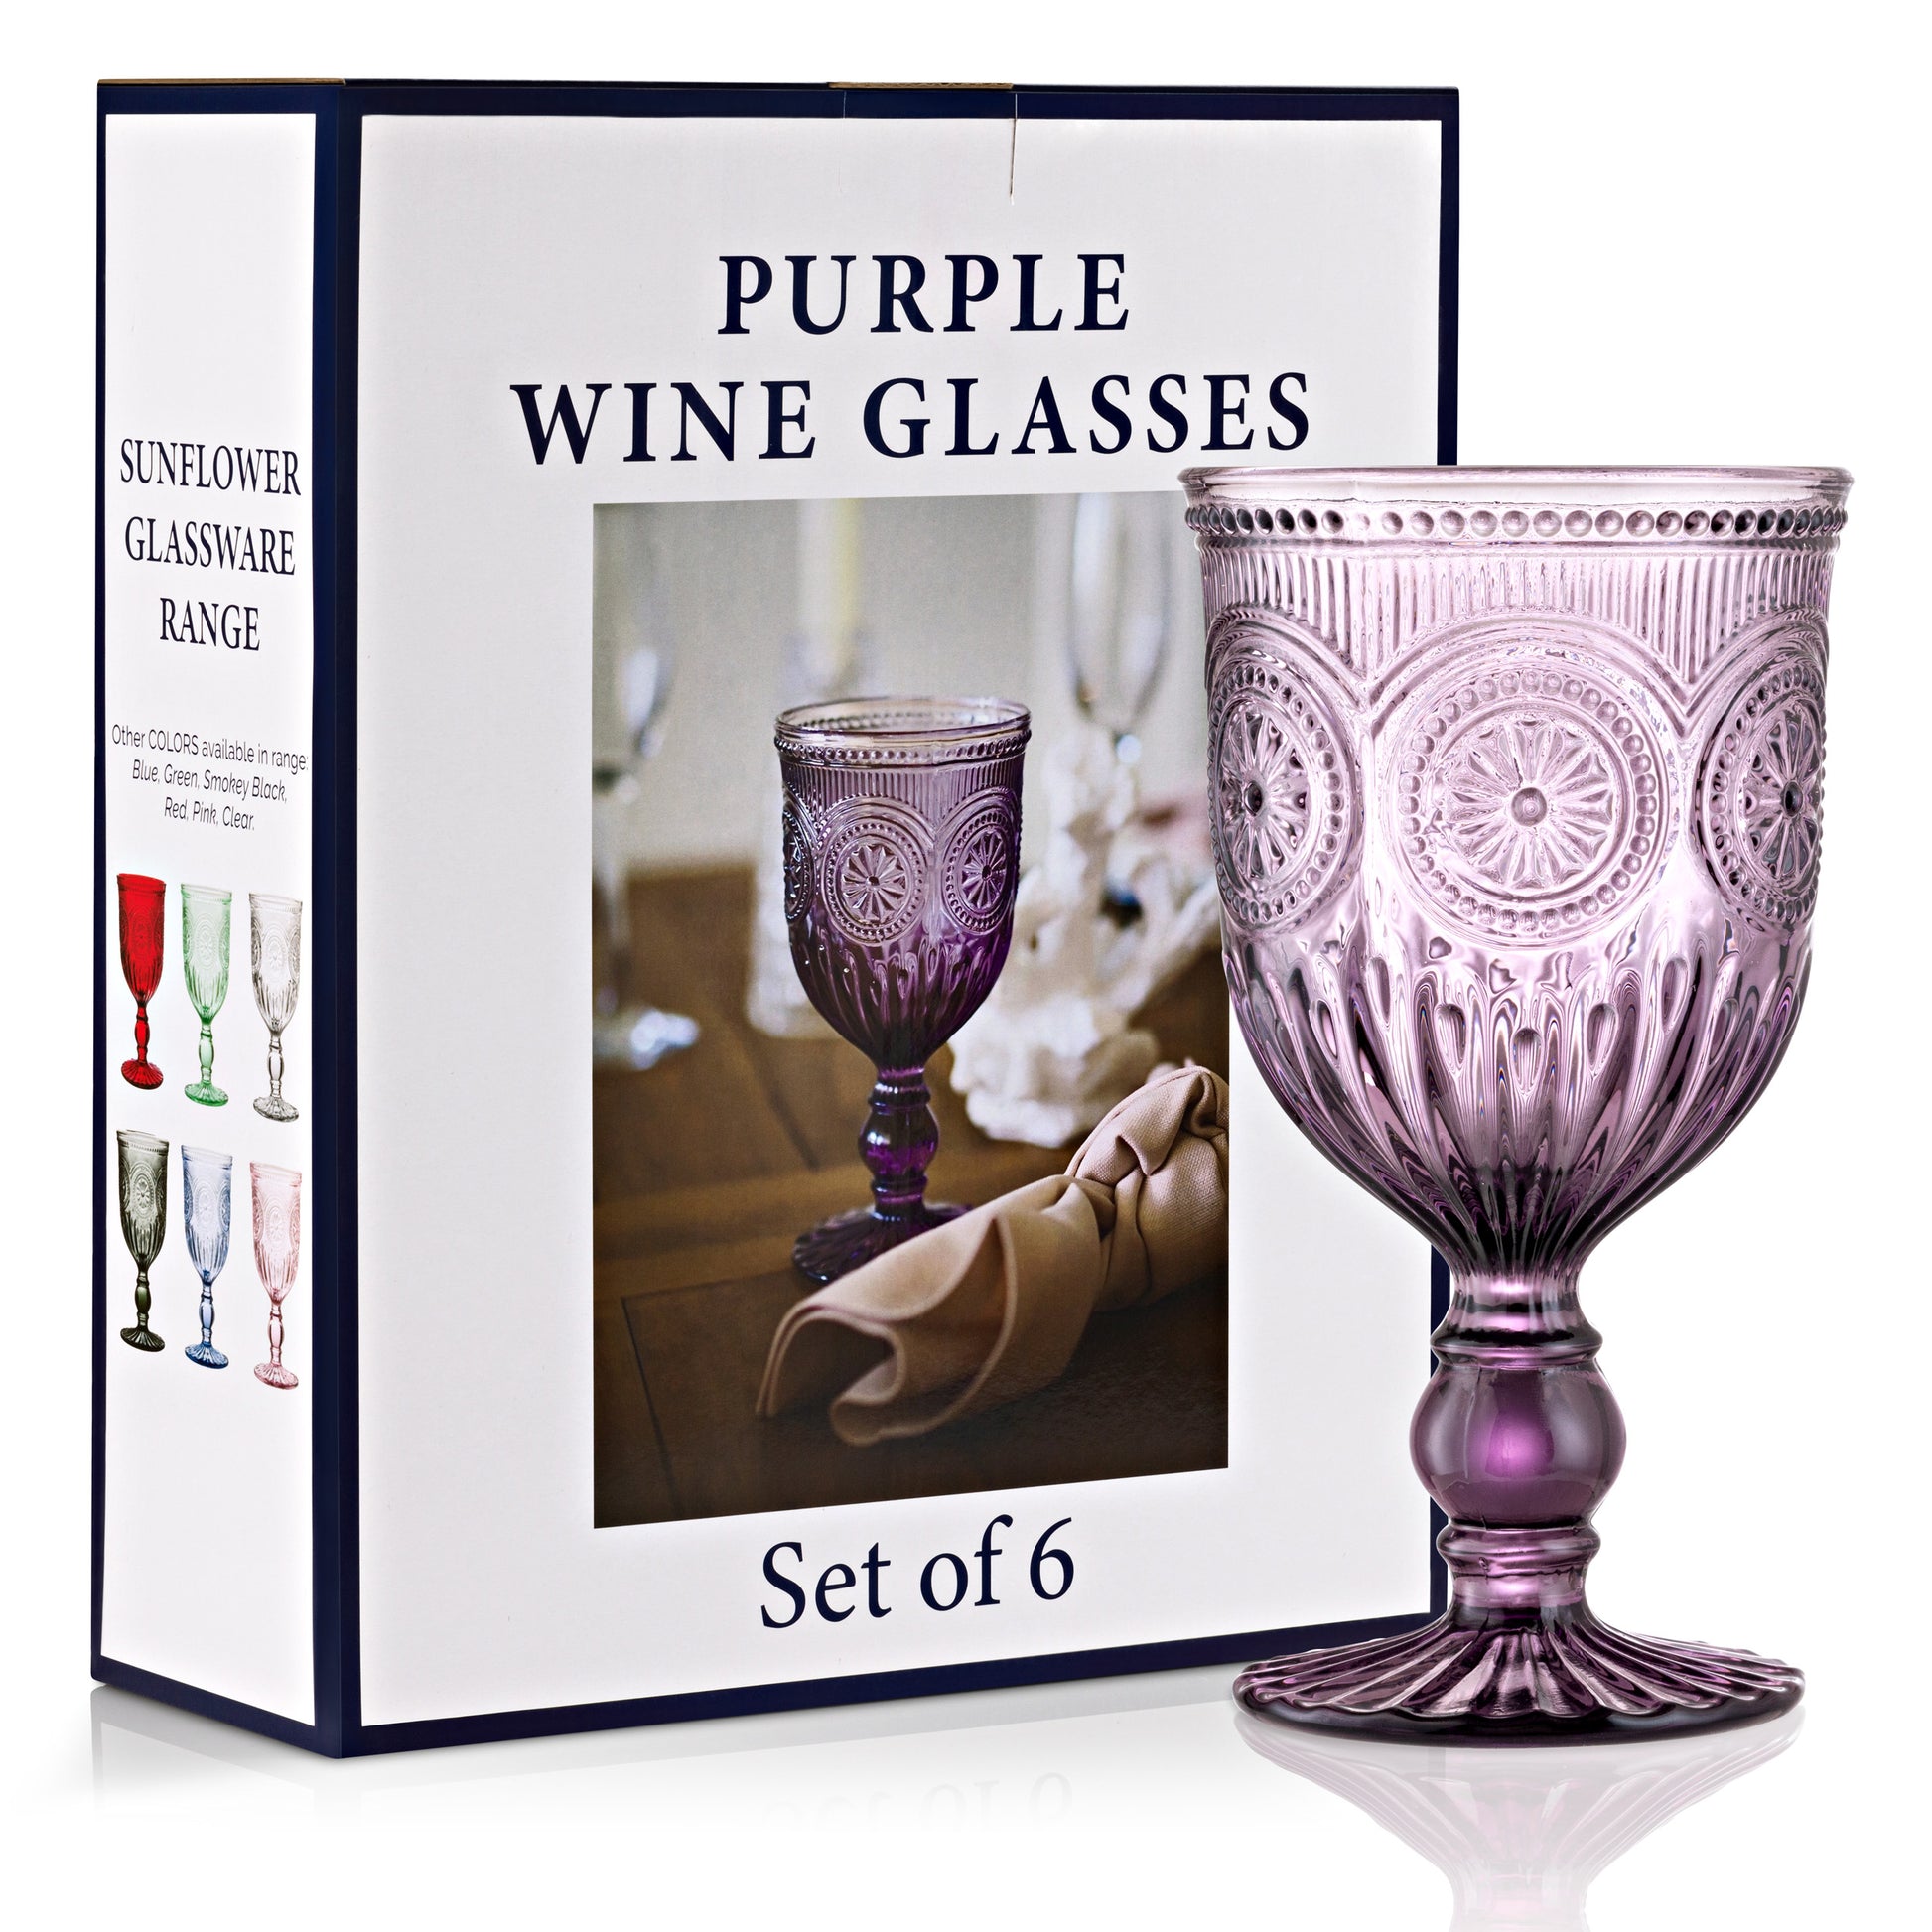 Bright Colors Clear Drinking Glasses Set